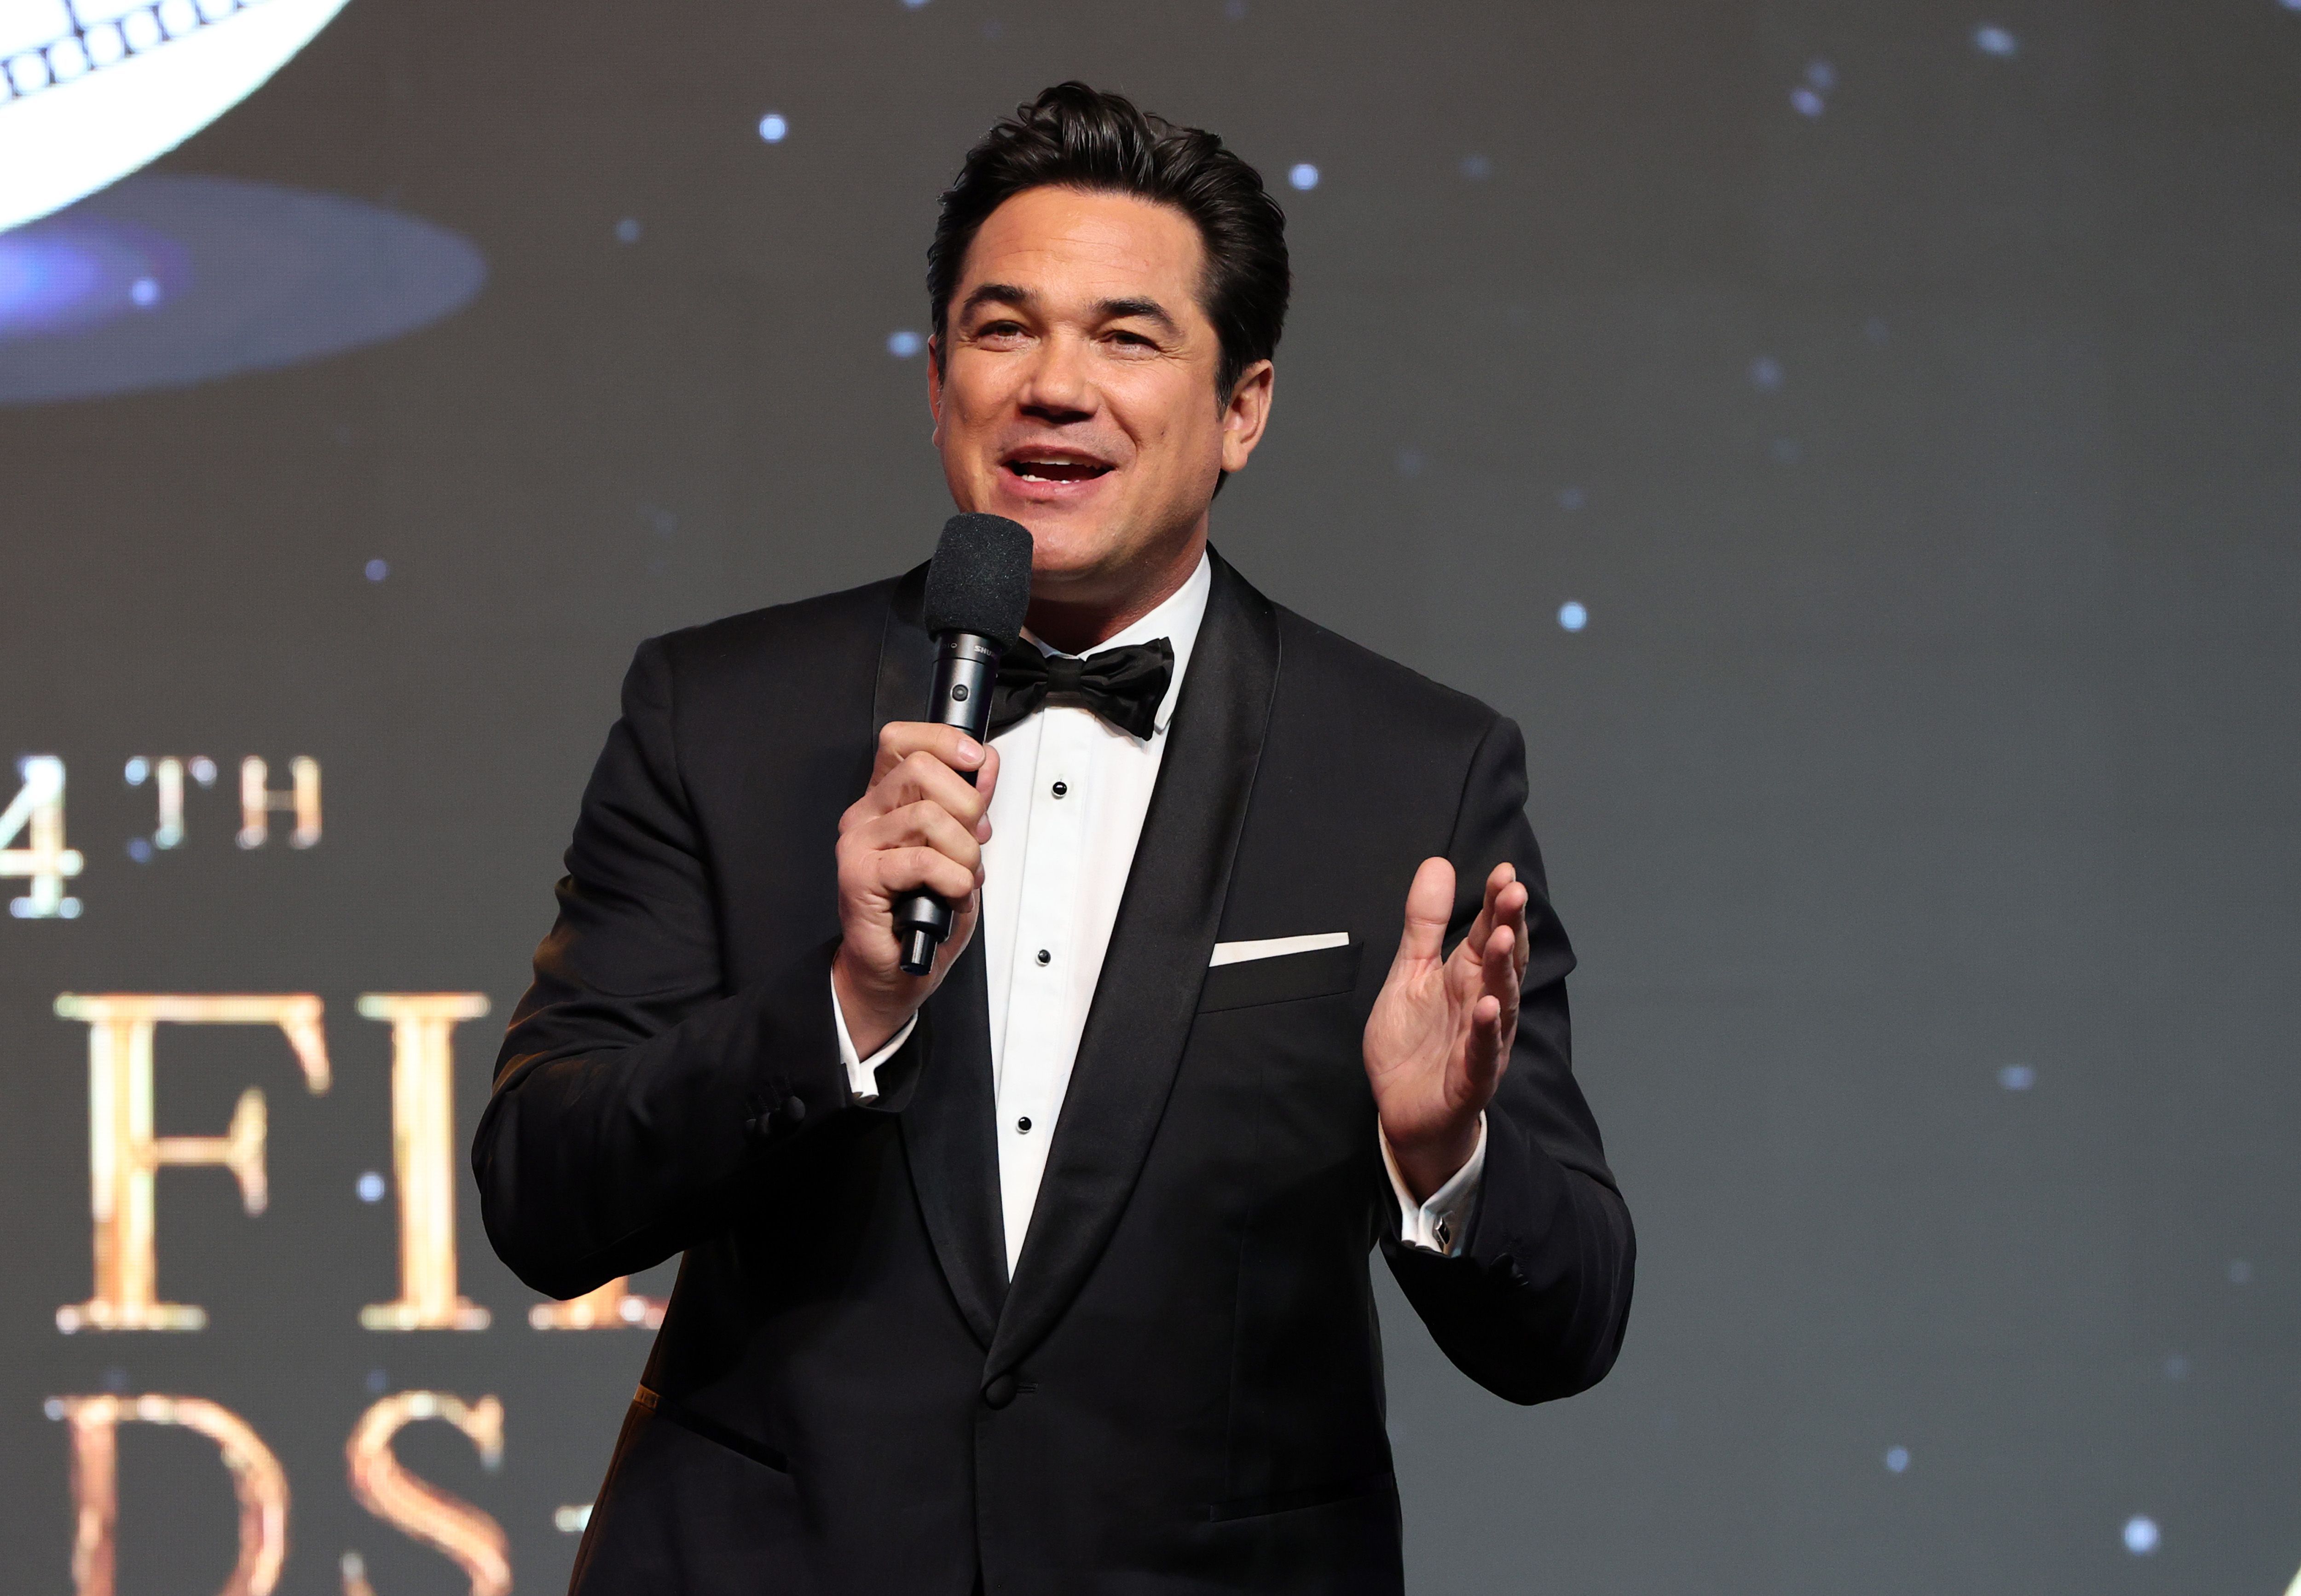 Dean Cain speaks onstage during the 24th Family Film Awards in Universal City, California, on March 24, 2021. | Source: Getty Images